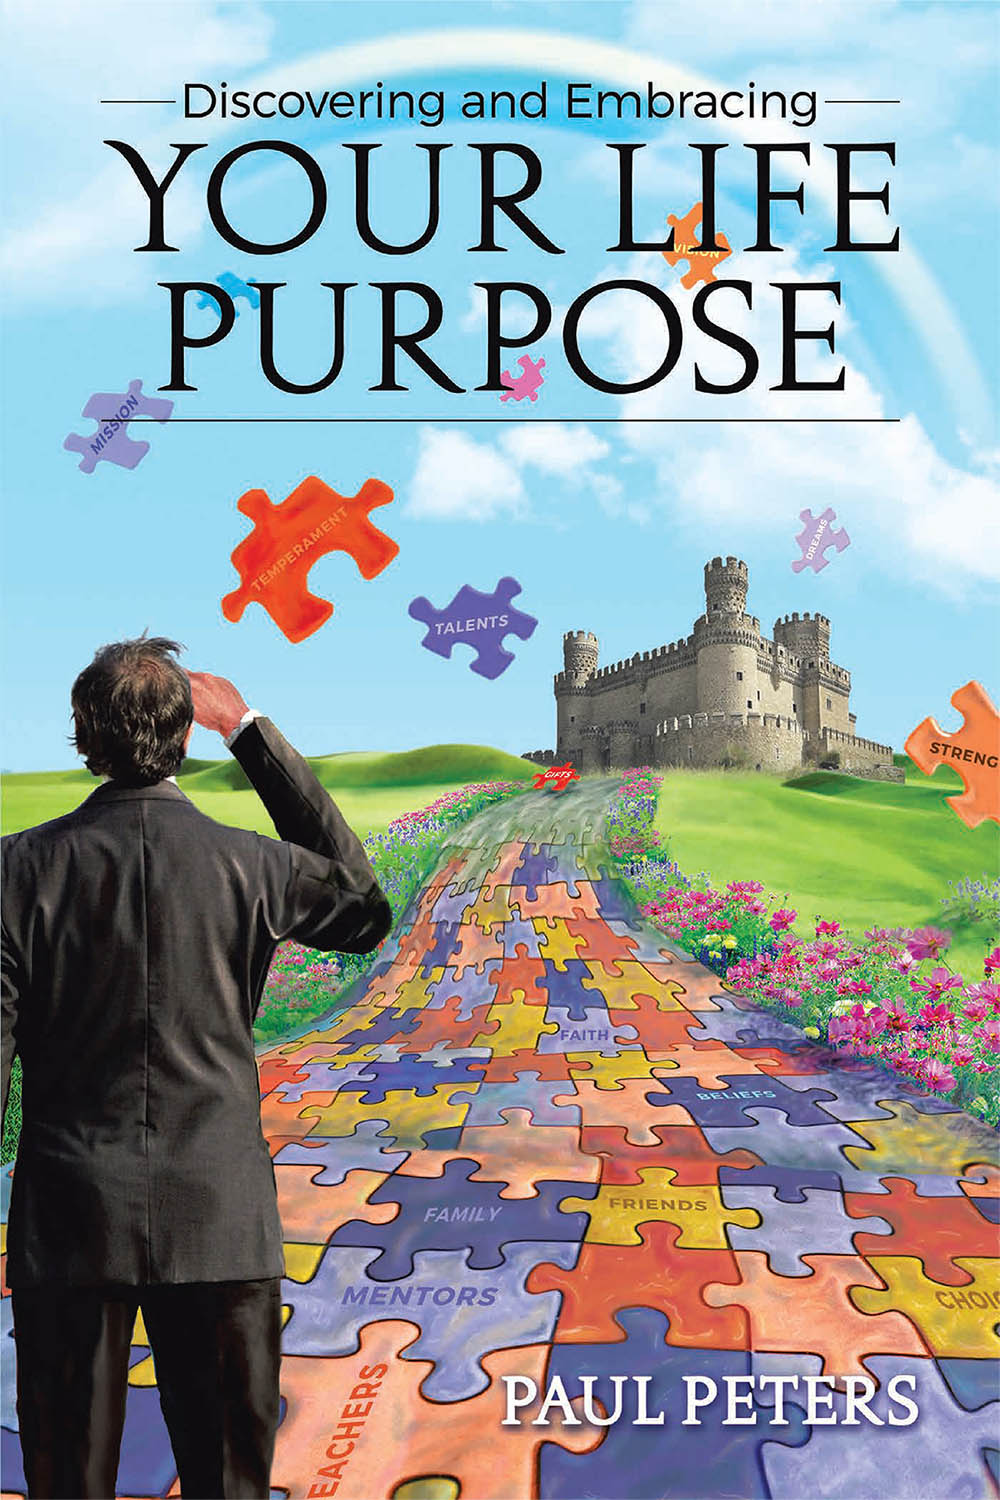 Discovering and Embracing Your Life Purpose, by Paul Peters